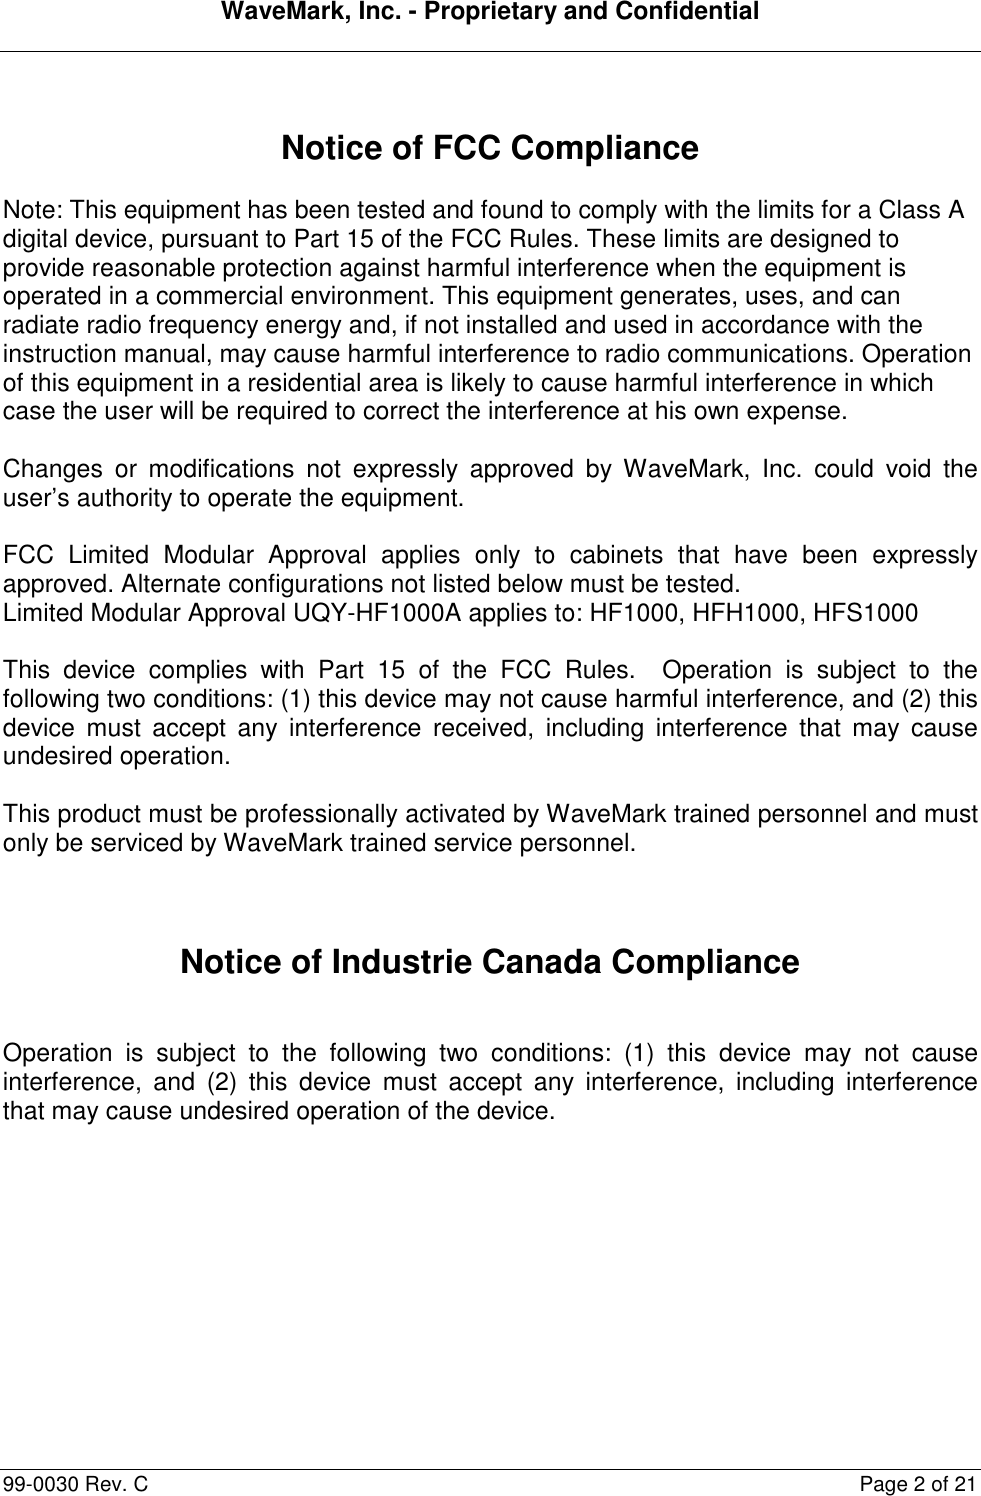 WaveMark, Inc. - Proprietary and Confidential  99-0030 Rev. C  Page 2 of 21   Notice of FCC Compliance  Note: This equipment has been tested and found to comply with the limits for a Class A digital device, pursuant to Part 15 of the FCC Rules. These limits are designed to provide reasonable protection against harmful interference when the equipment is operated in a commercial environment. This equipment generates, uses, and can radiate radio frequency energy and, if not installed and used in accordance with the instruction manual, may cause harmful interference to radio communications. Operation of this equipment in a residential area is likely to cause harmful interference in which case the user will be required to correct the interference at his own expense.  Changes  or  modifications  not  expressly  approved  by  WaveMark,  Inc.  could  void  the user’s authority to operate the equipment.  FCC  Limited  Modular  Approval  applies  only  to  cabinets  that  have  been  expressly approved. Alternate configurations not listed below must be tested.  Limited Modular Approval UQY-HF1000A applies to: HF1000, HFH1000, HFS1000  This  device  complies  with  Part  15  of  the  FCC  Rules.    Operation  is  subject  to  the following two conditions: (1) this device may not cause harmful interference, and (2) this device  must  accept  any  interference  received,  including  interference  that  may  cause undesired operation.  This product must be professionally activated by WaveMark trained personnel and must only be serviced by WaveMark trained service personnel.    Notice of Industrie Canada Compliance   Operation  is  subject  to  the  following  two  conditions:  (1)  this  device  may  not  cause interference,  and  (2)  this  device  must  accept  any  interference,  including  interference that may cause undesired operation of the device. 